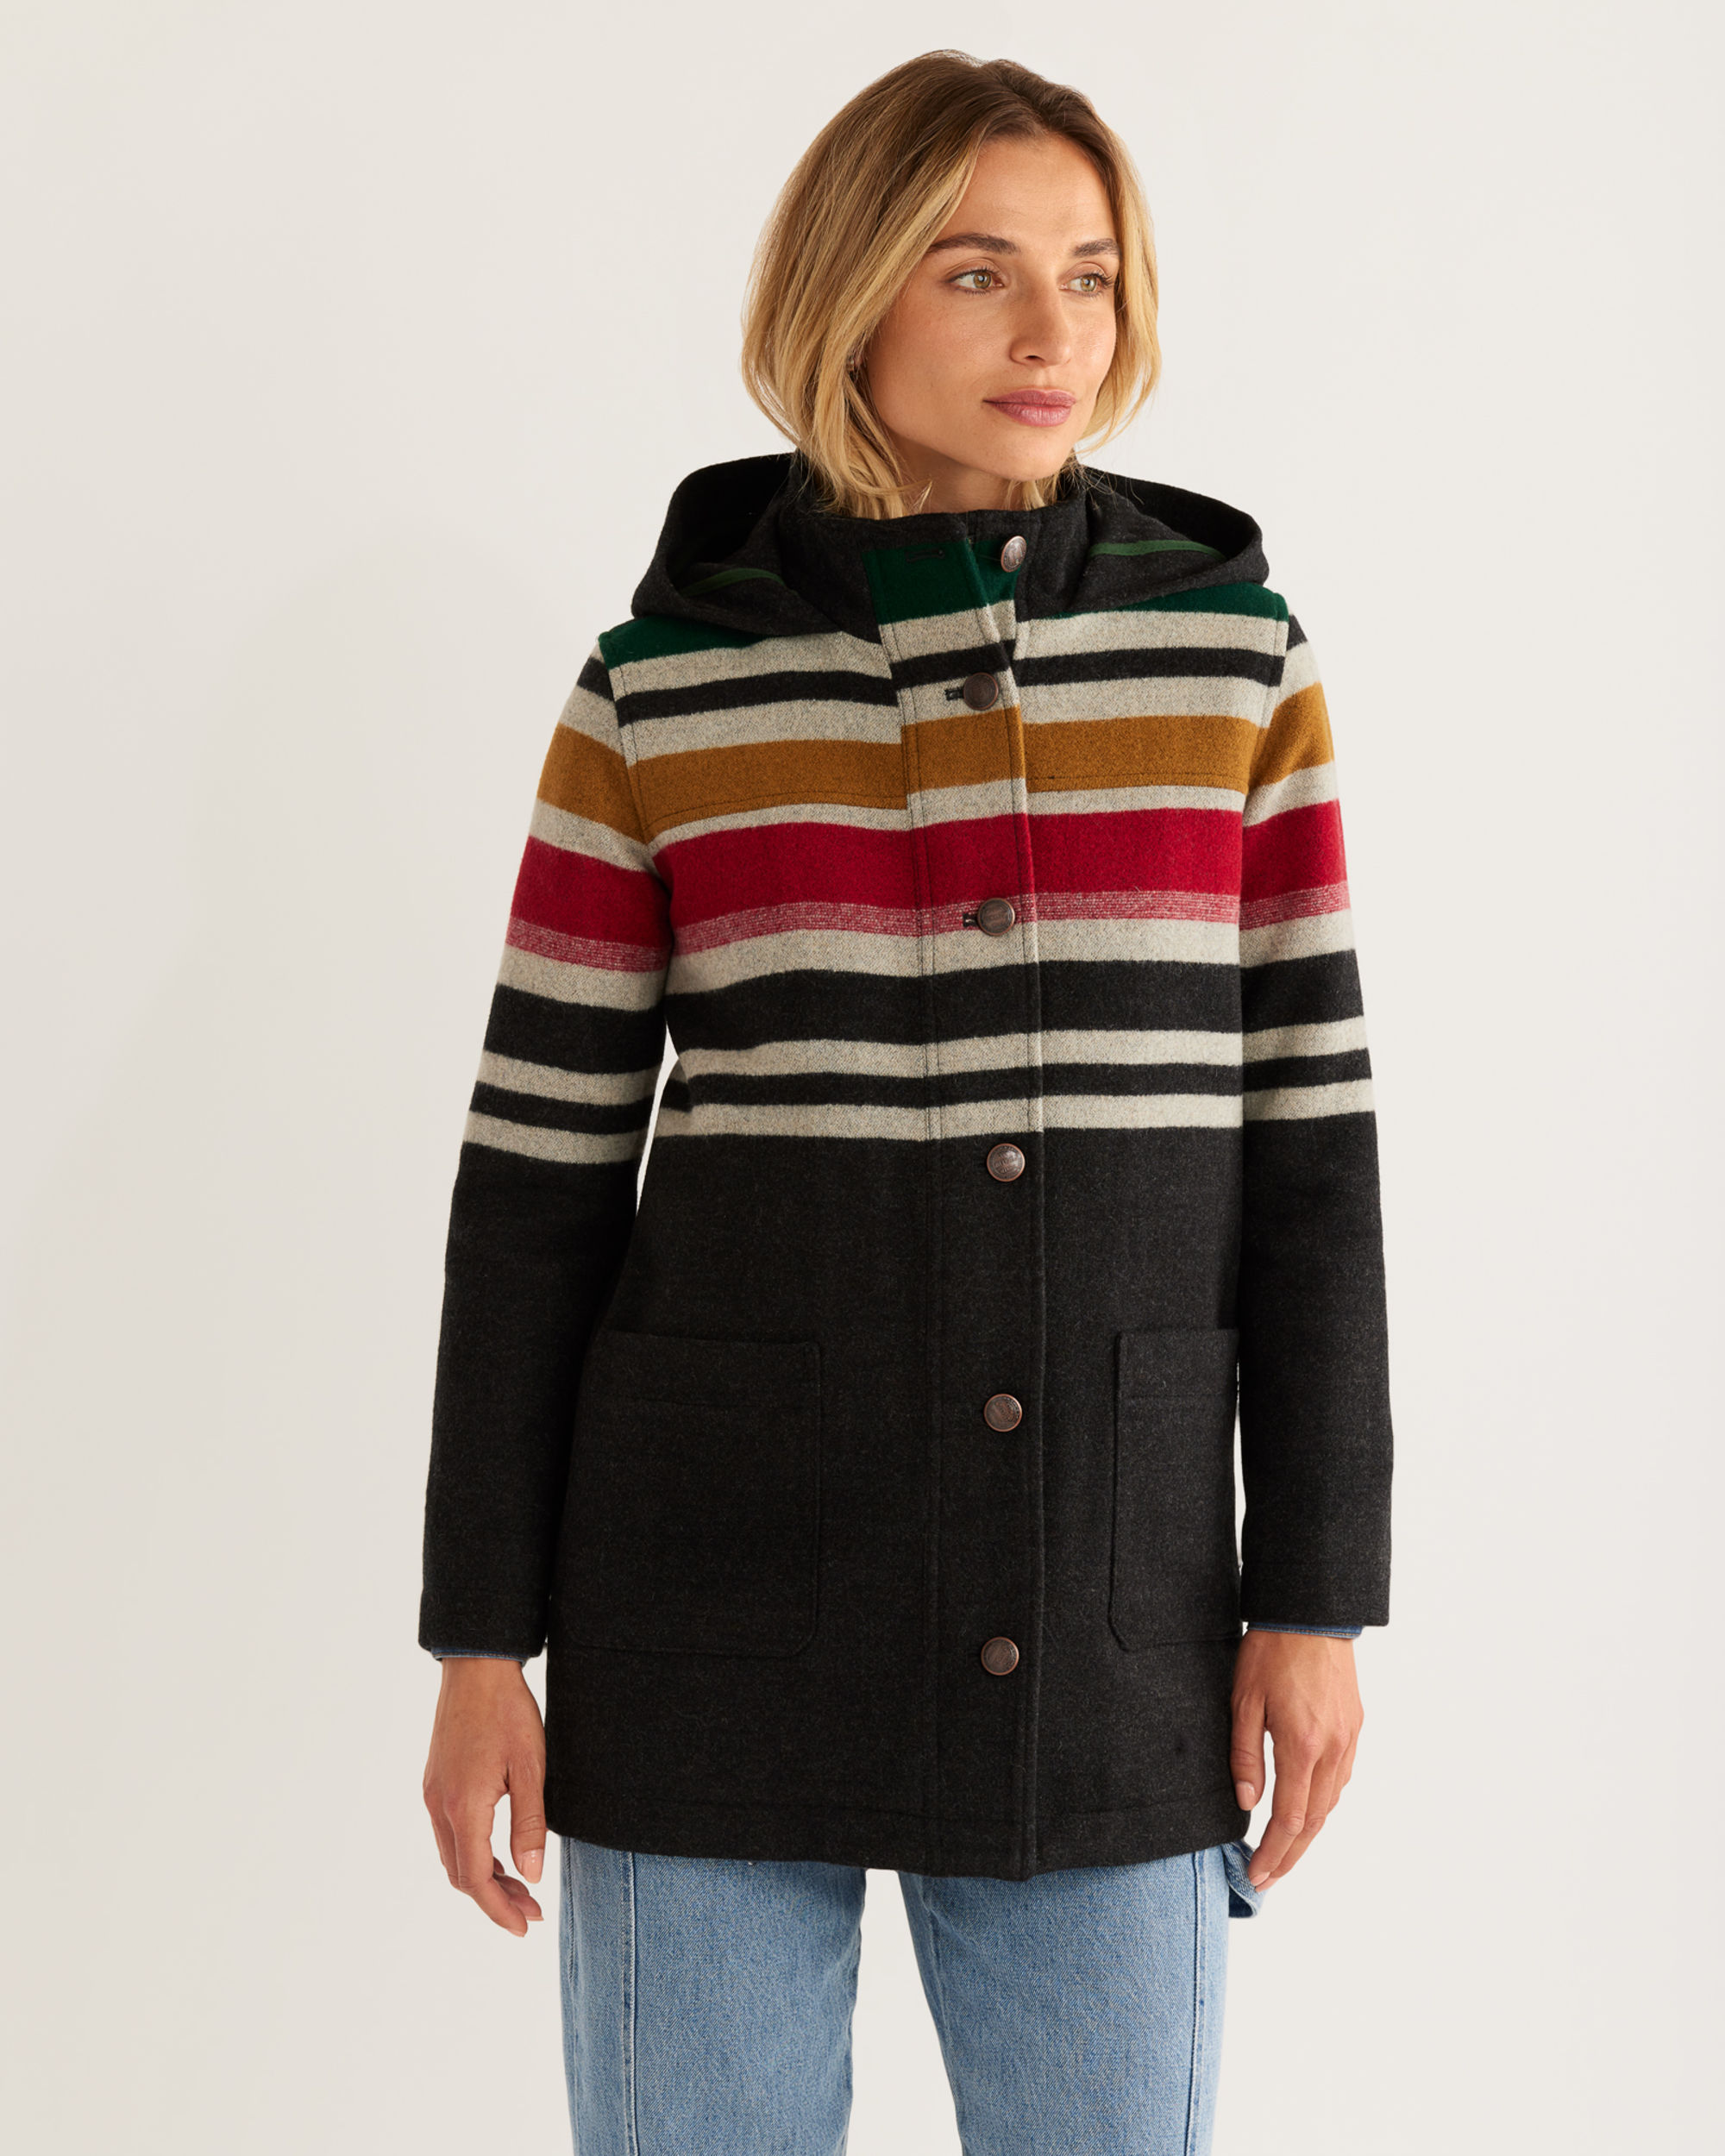 WOMEN'S CAMP STRIPE WOOL QUILTED PARKA | Pendleton